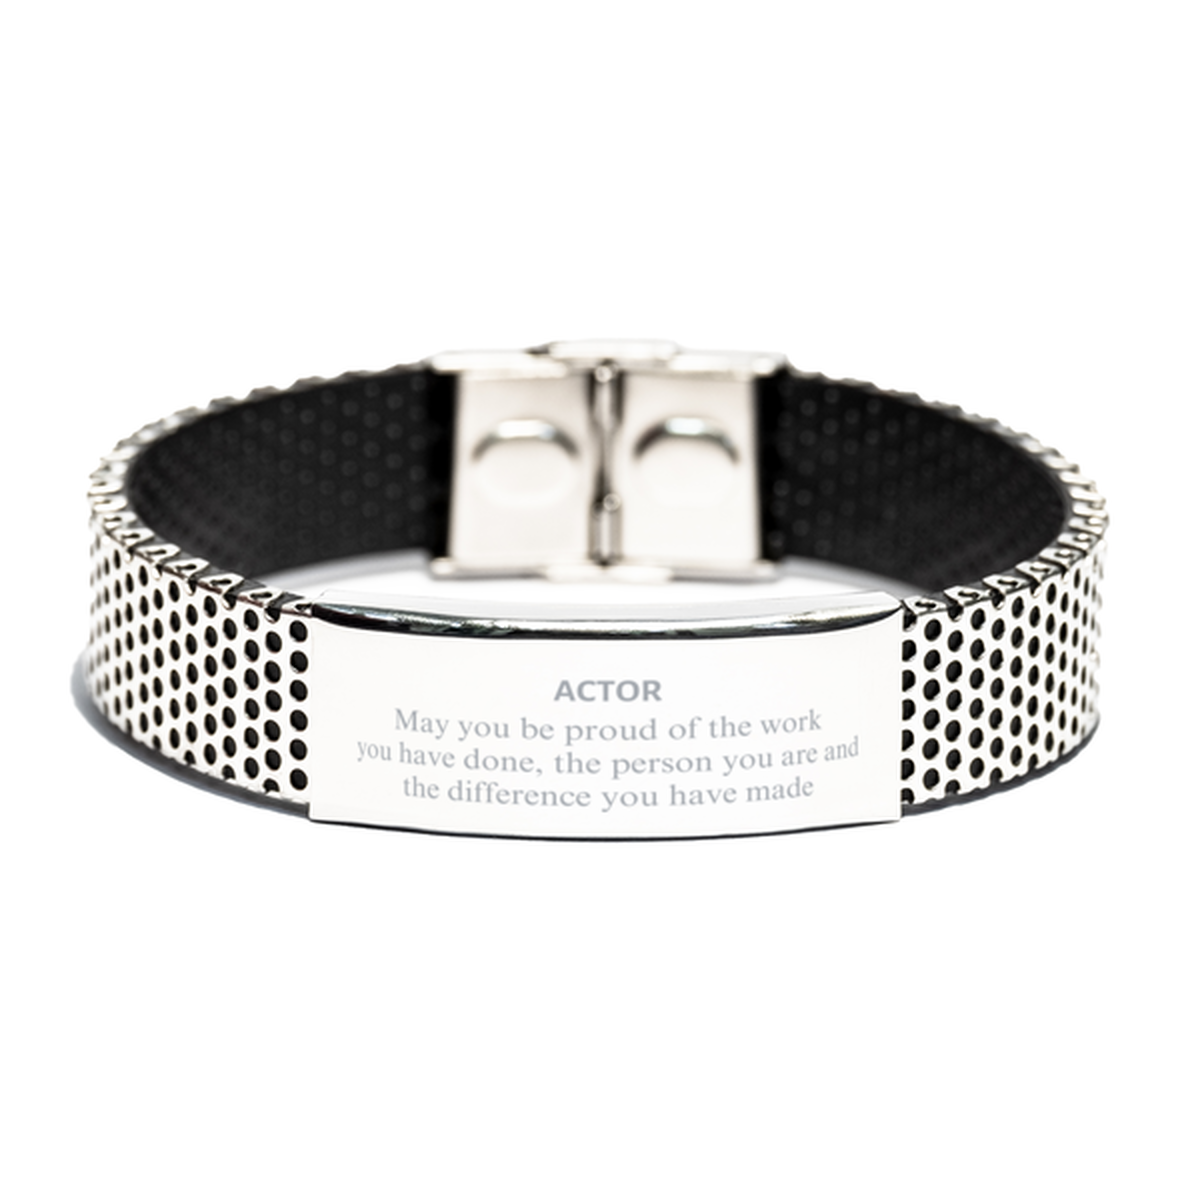 Actor May you be proud of the work you have done, Retirement Actor Stainless Steel Bracelet for Colleague Appreciation Gifts Amazing for Actor